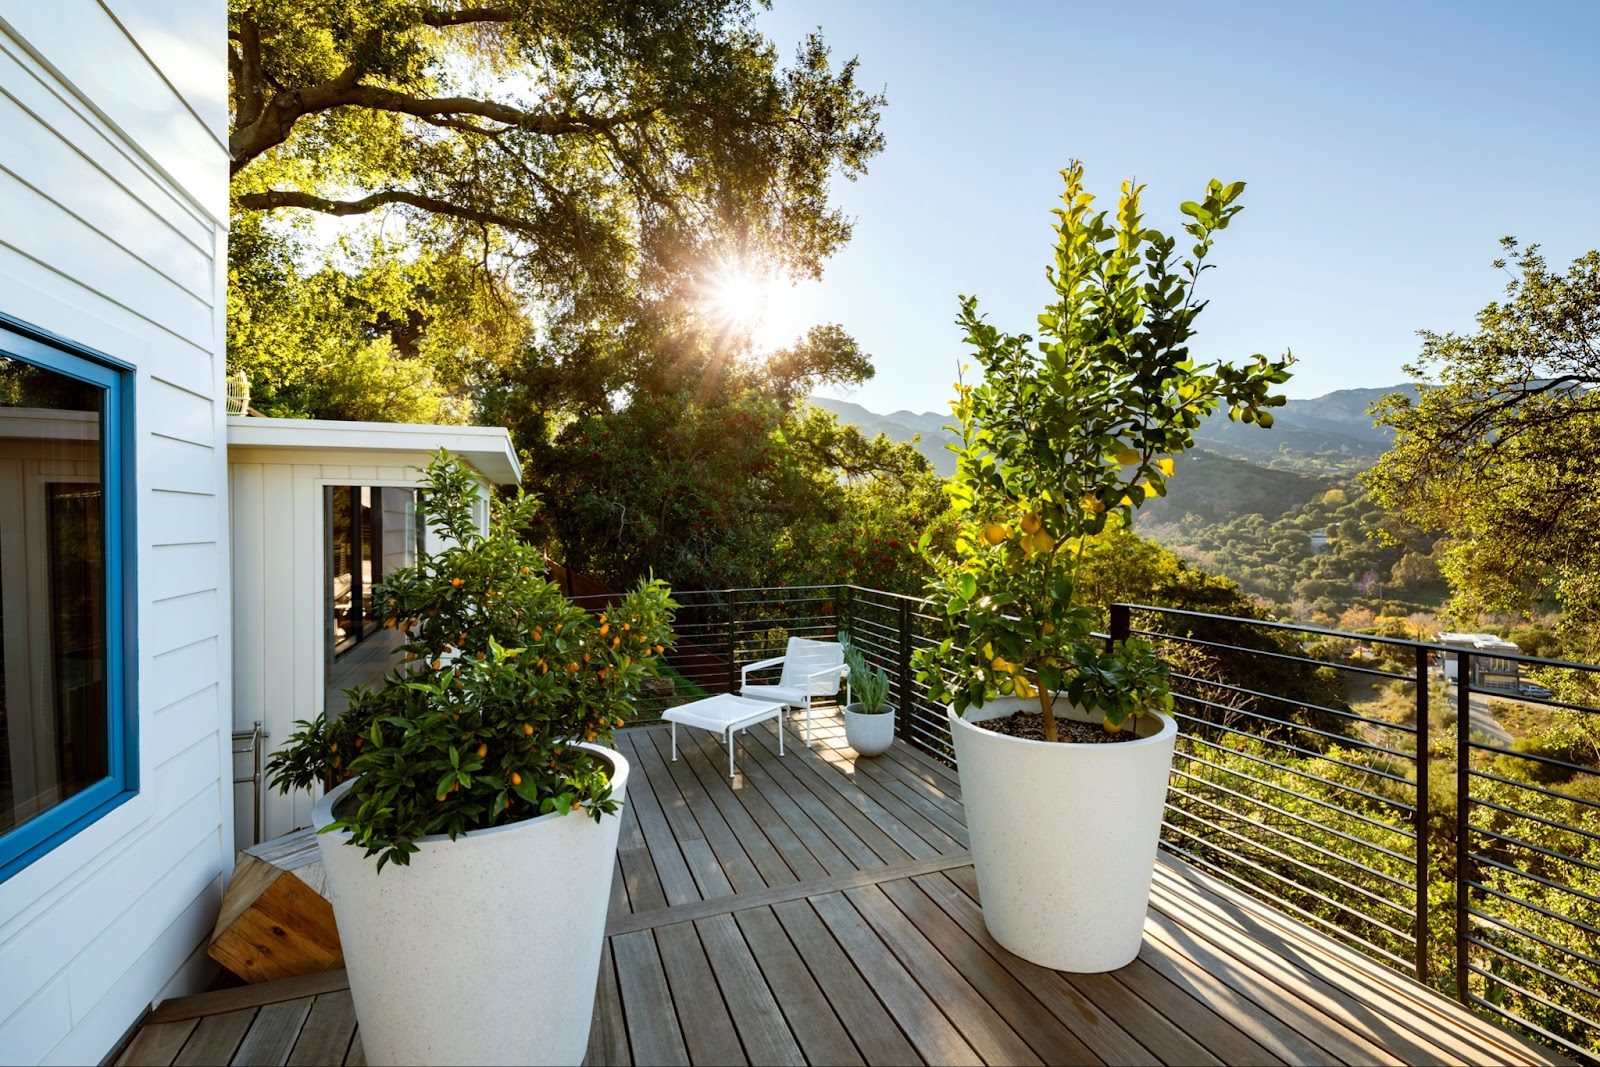 Introducing Topanga Canyon, a Bohemian Hillside Retreat that Exudes West Coast Luxury. This short-term rental is available at Open Air Homes and Airbnb.